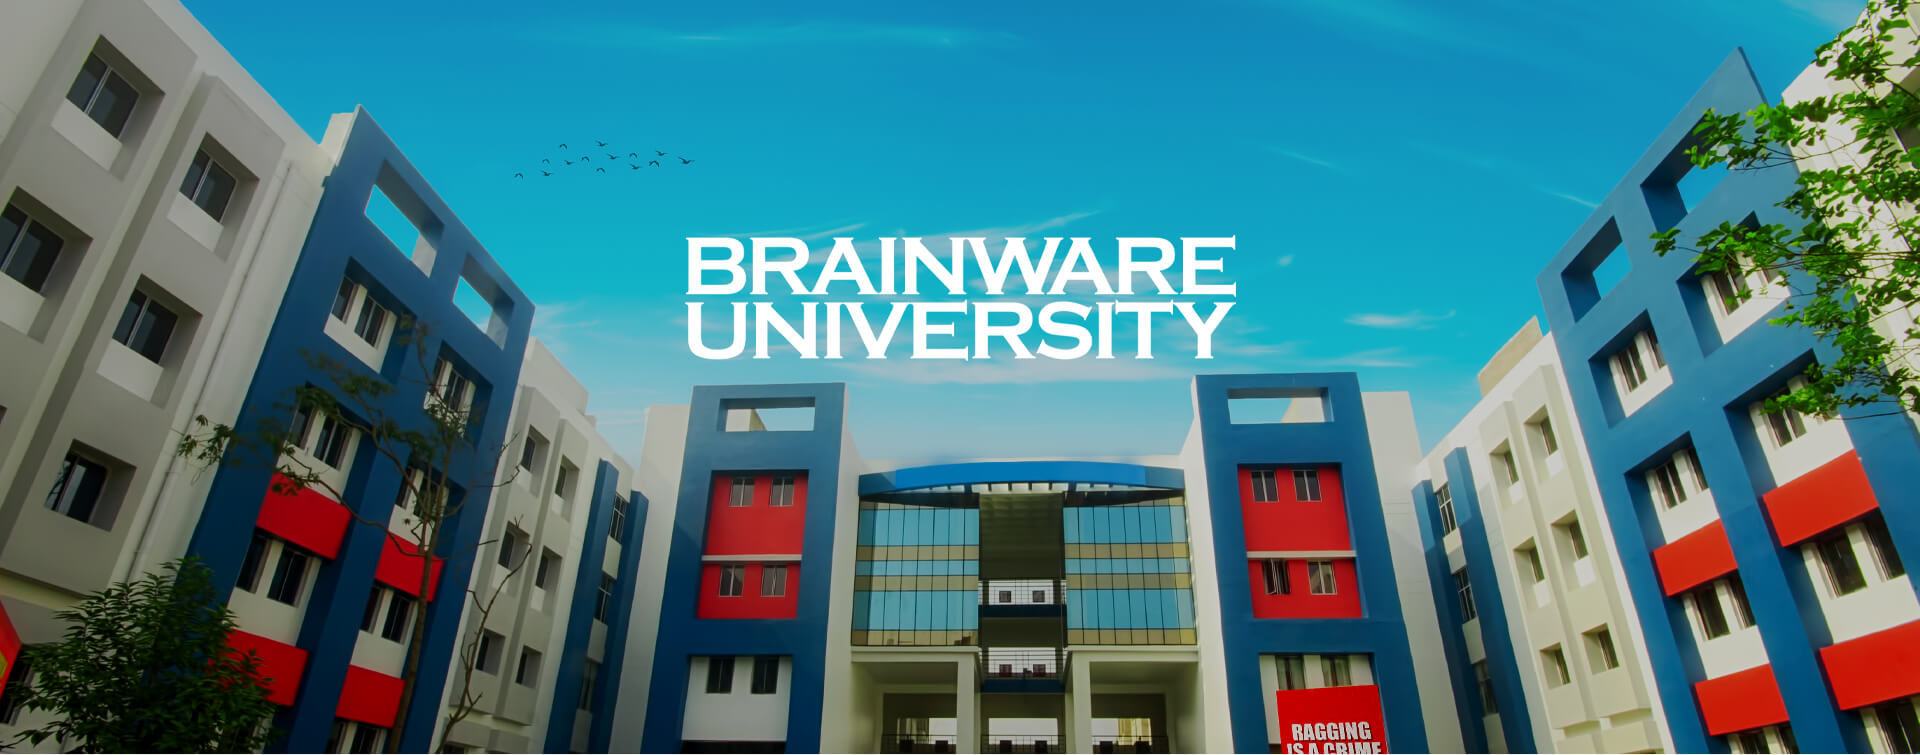 Brainware University hiring Faculty Posts for Multiple Departments ! Apply Now